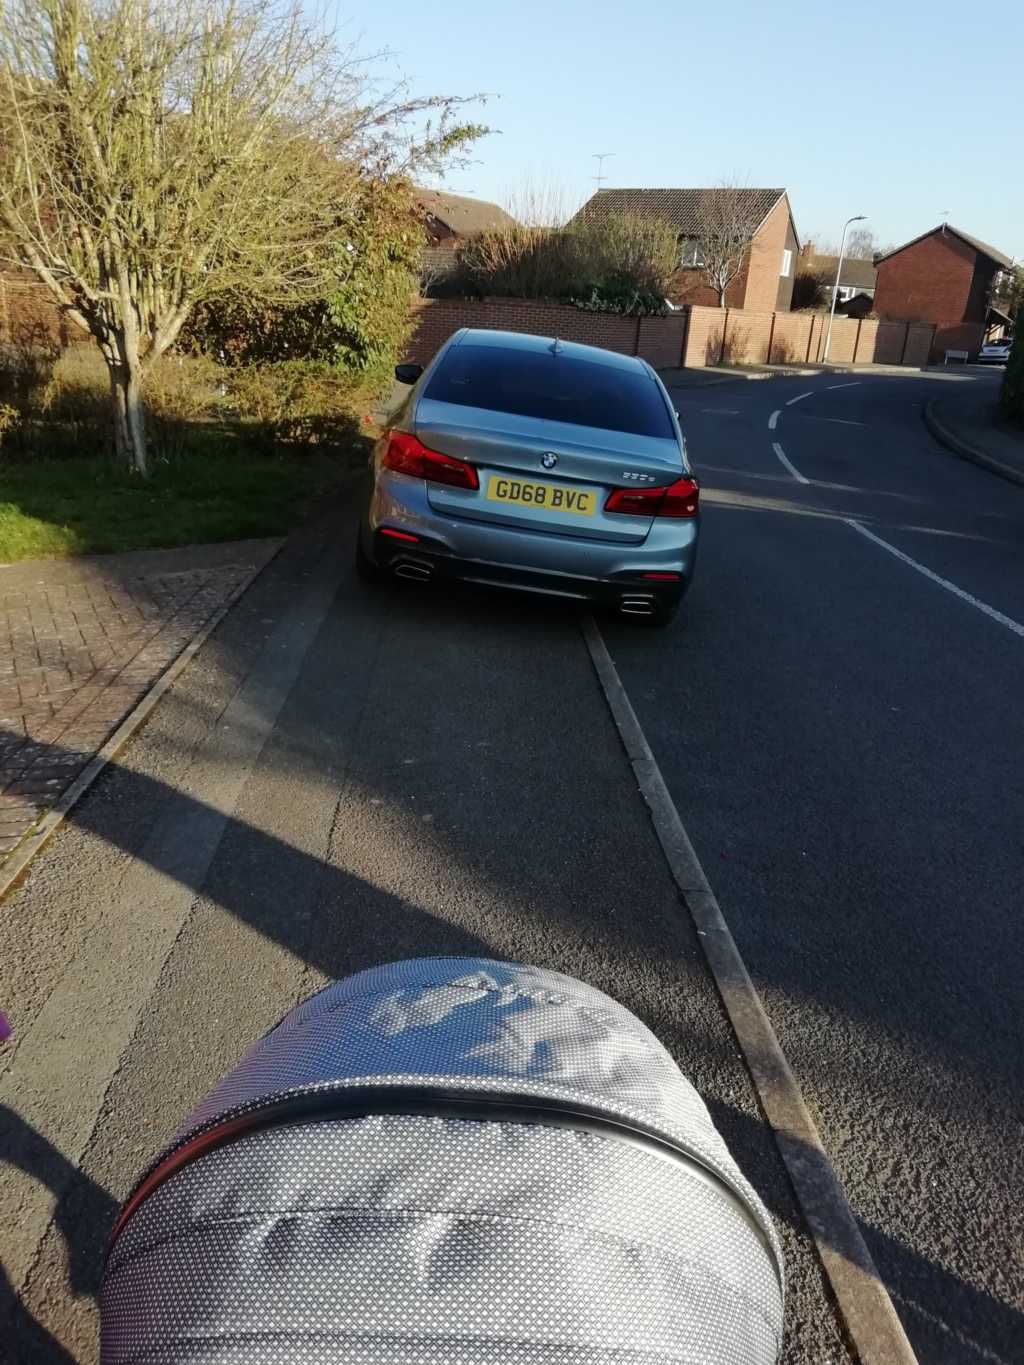 GD68 BVC displaying Inconsiderate Parking